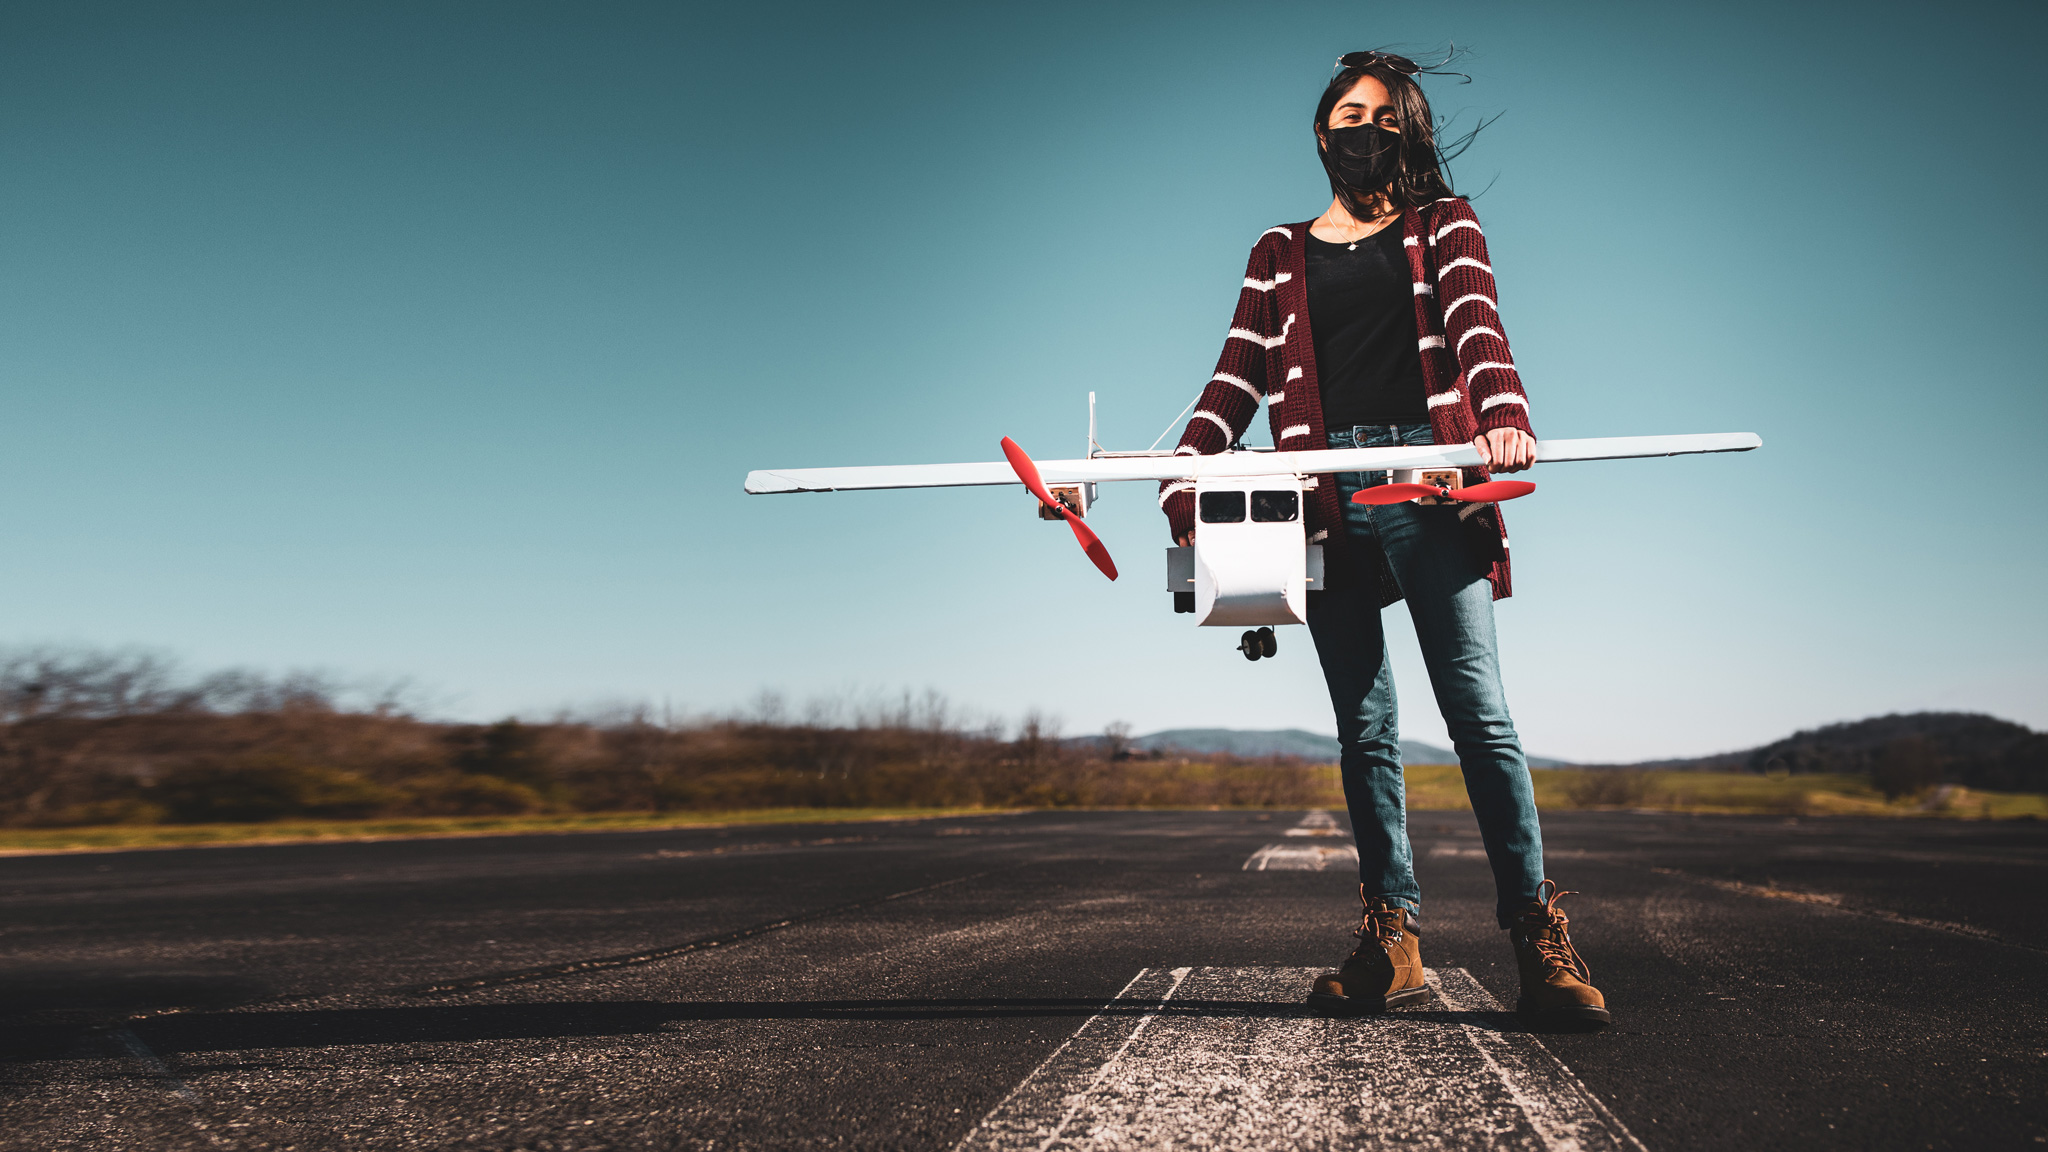 A Design Build Fly team member stands on the tarmac holding a remote control plane.